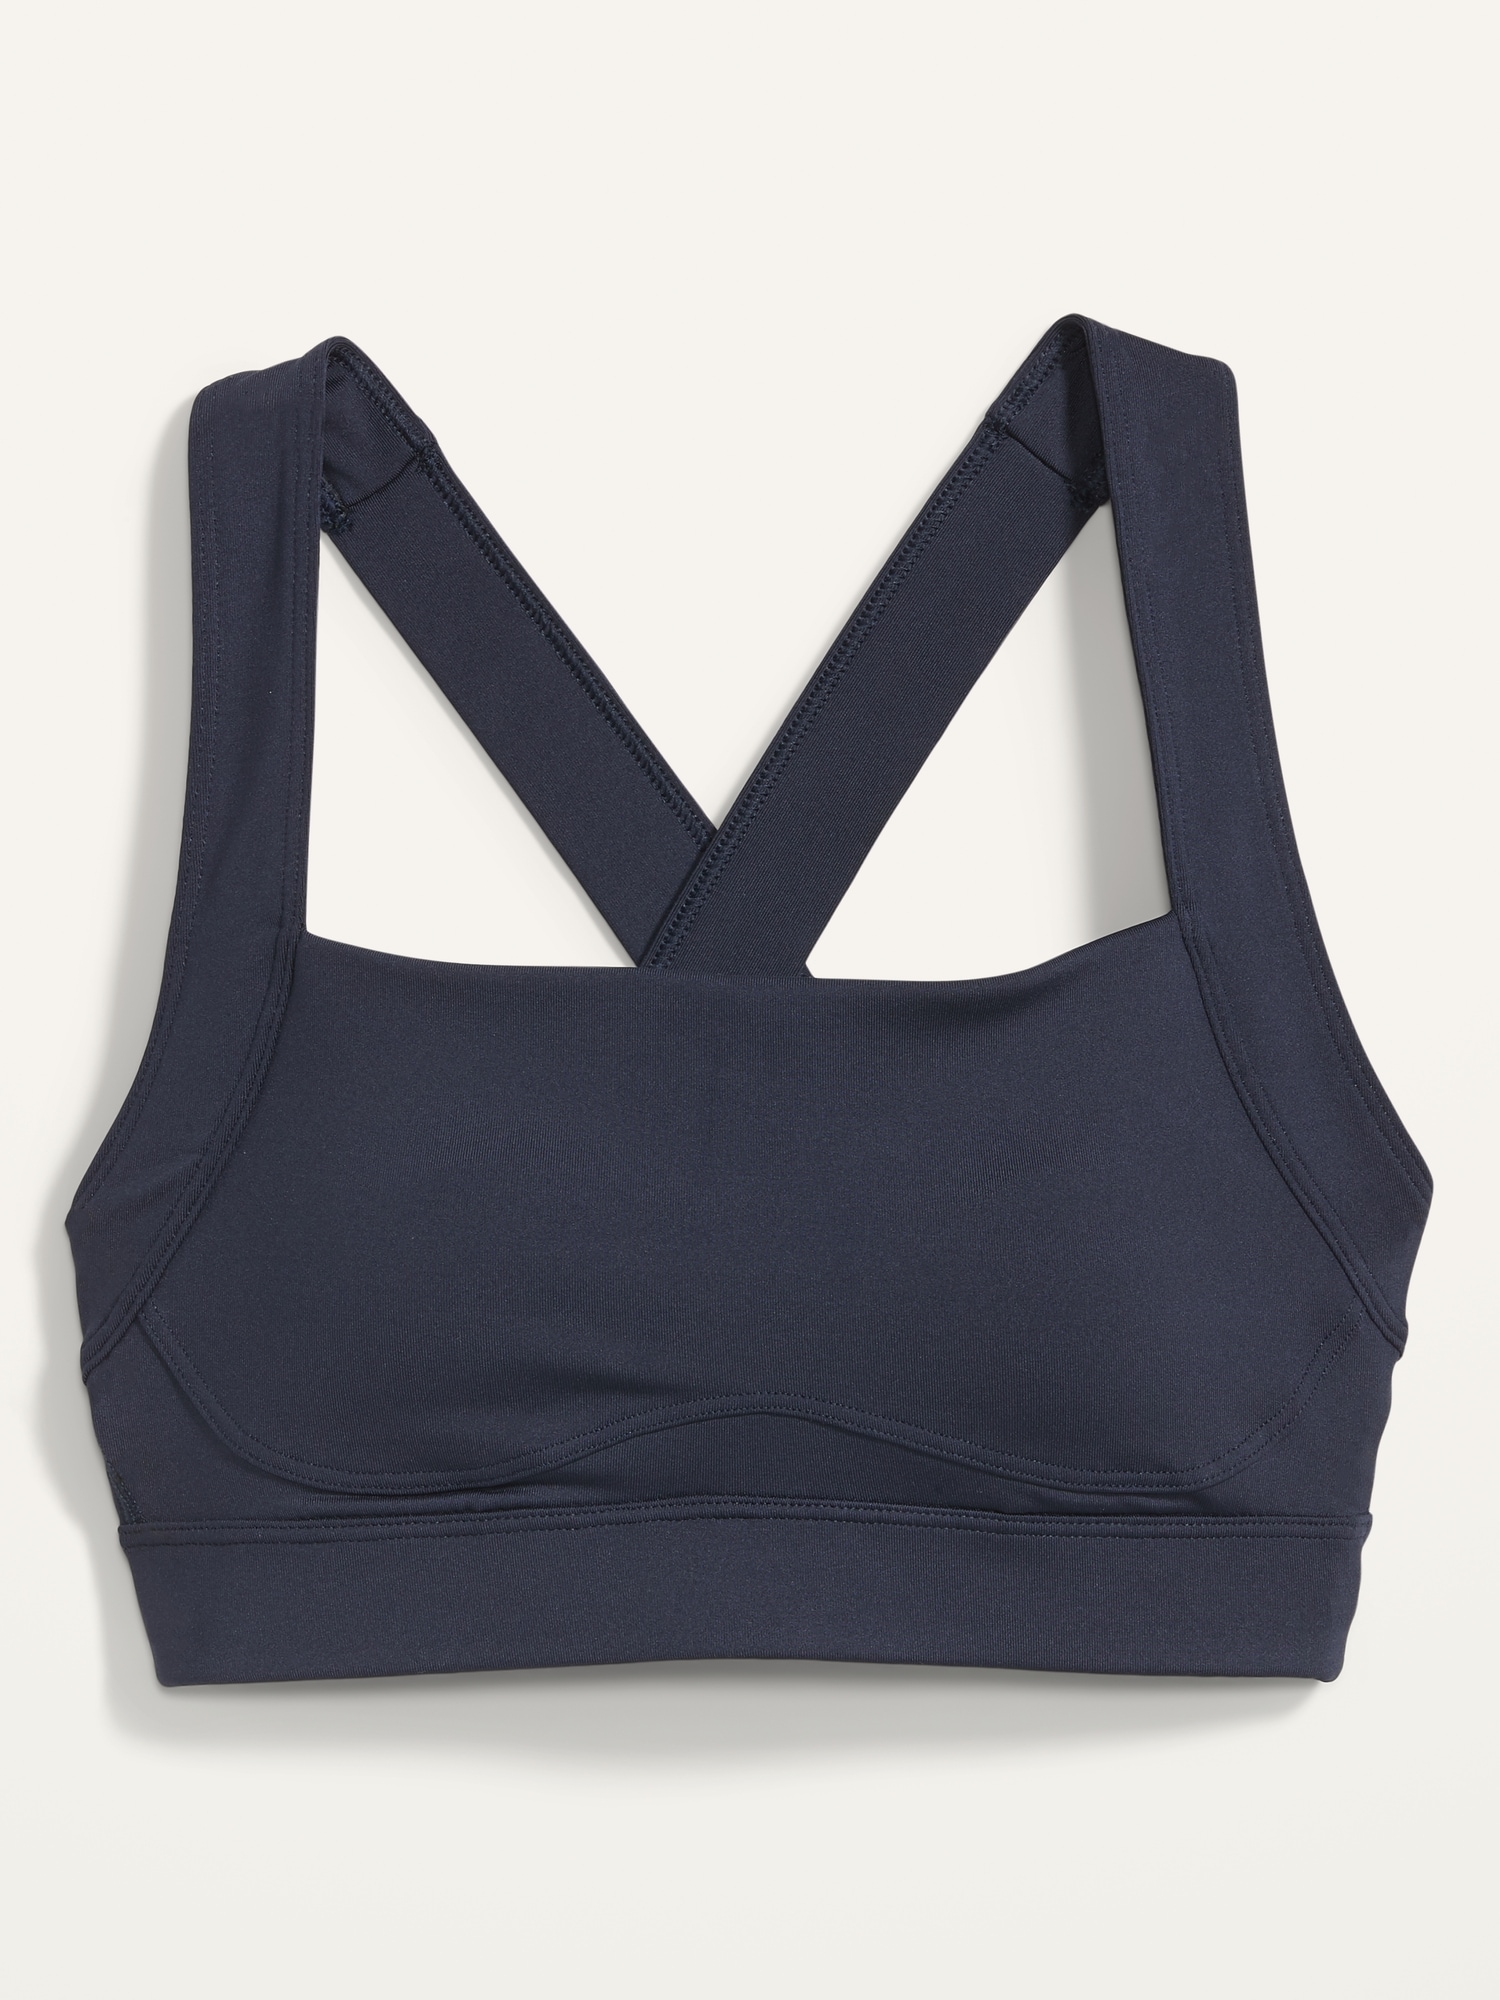 High Support Cross-Back Sports Bra for Women | Old Navy